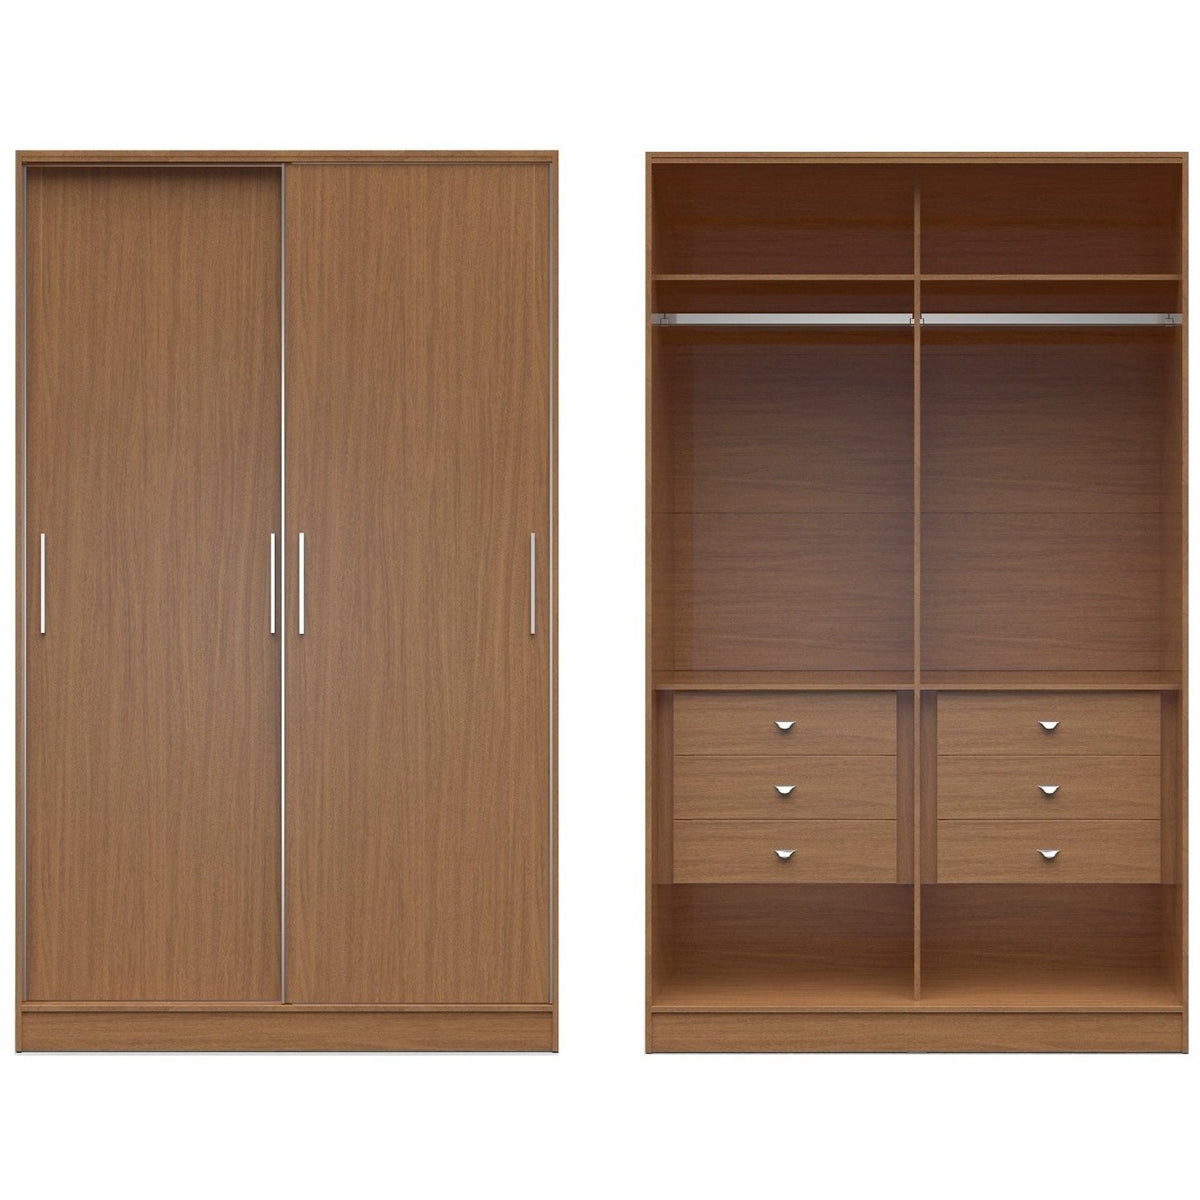 Manhattan Comfort Chelsea 1.0 - 54.33 inch Wide He/She Wardrobe with 6 Drawers and 2 Sliding Doors in Maple Cream-Minimal & Modern